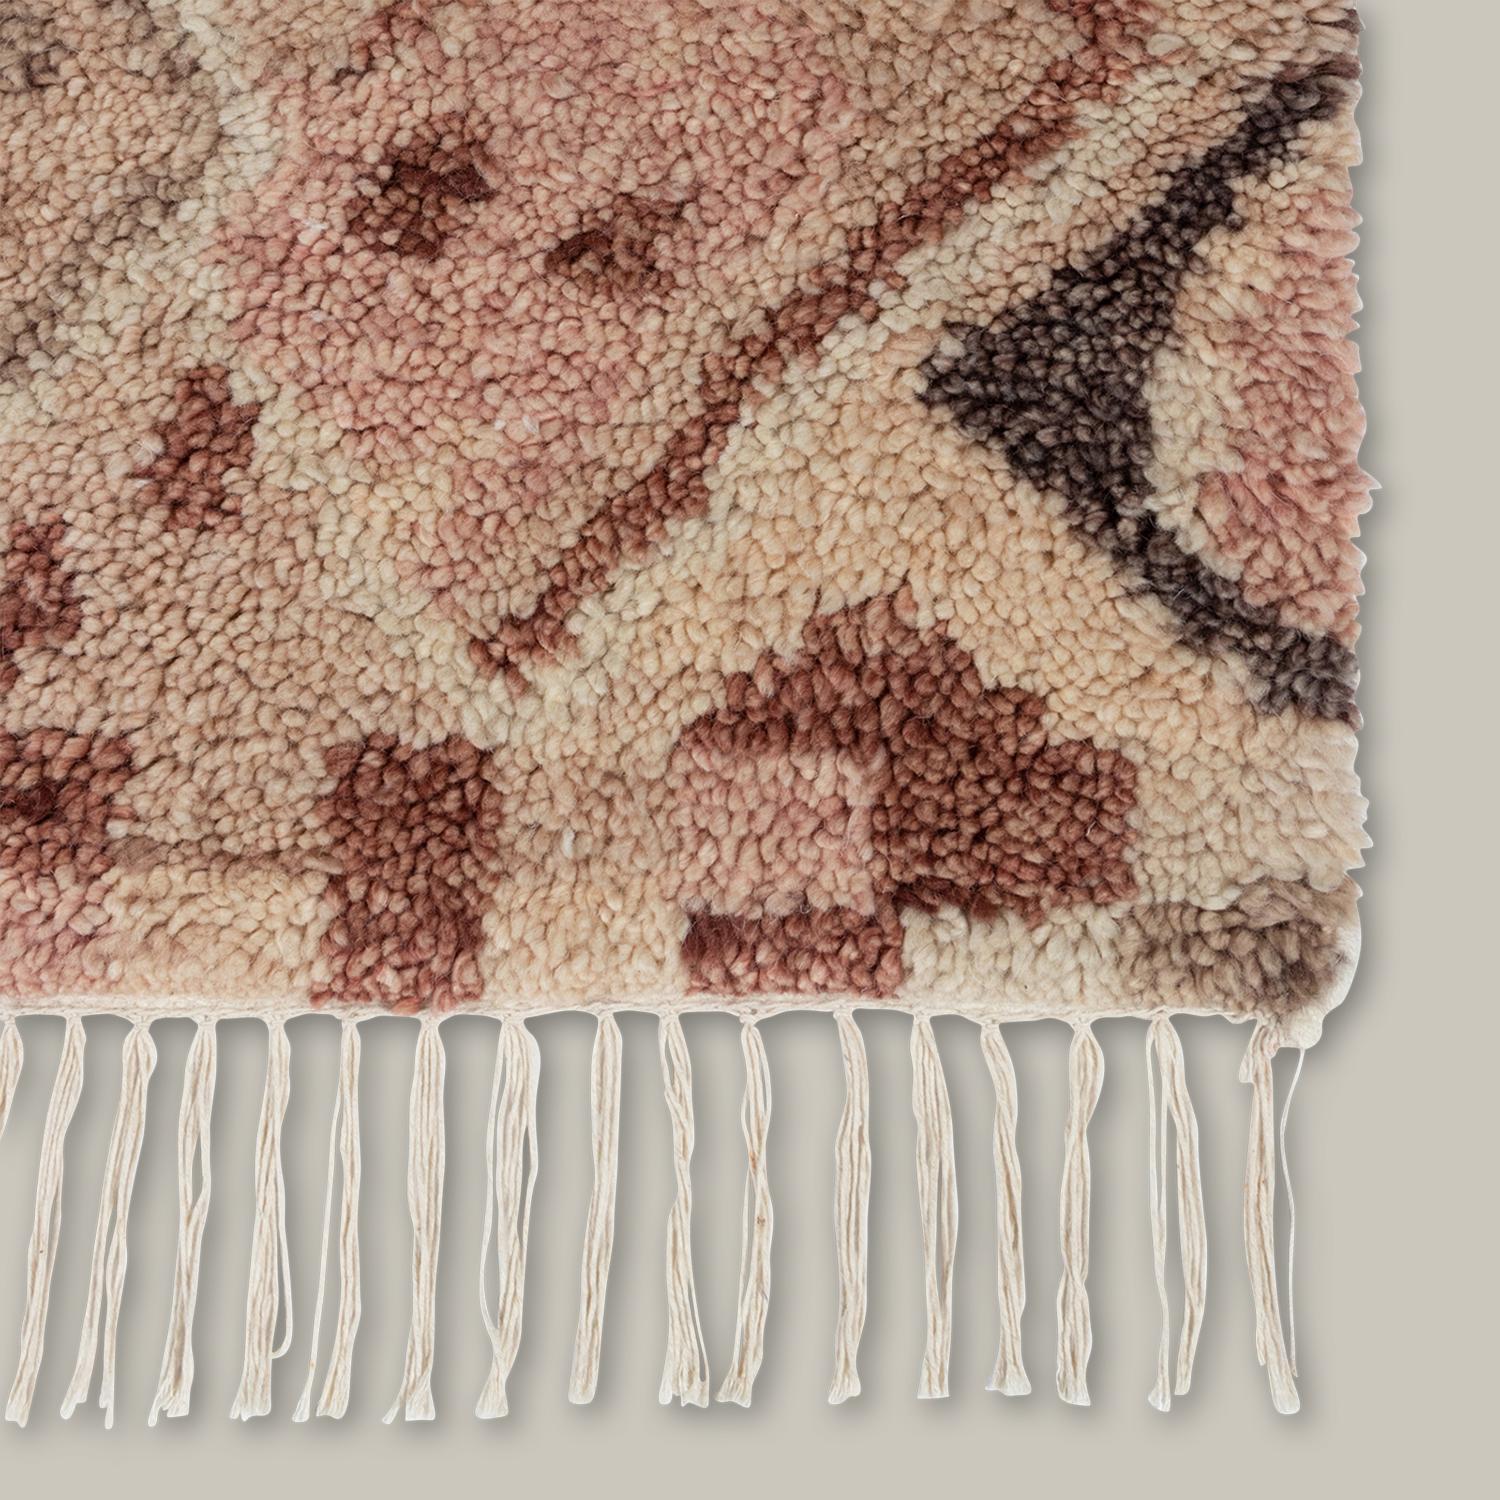 “Doukkala Gnibi” 'Natural' Moroccan-Inspired Rug by Christiane Lemieux In New Condition For Sale In New York, NY